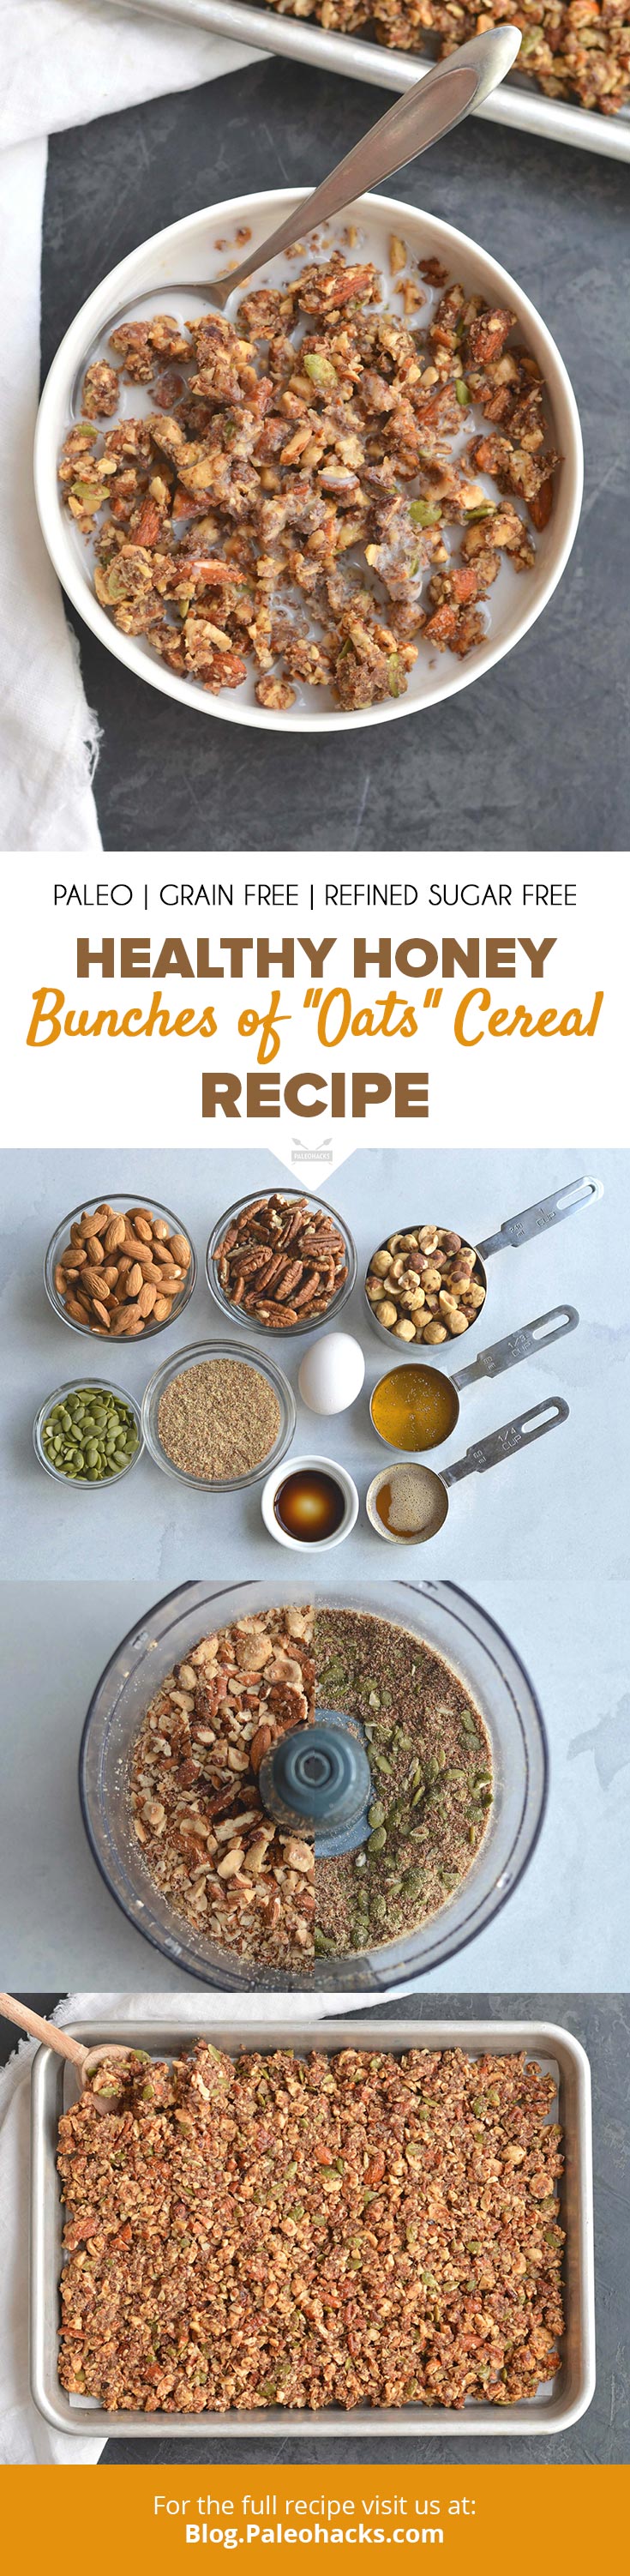 Crunch into a bowl of gluten-free Honey Bunches of ‘Oats’ with roasted nuts, seeds, and sweet honey vanilla.